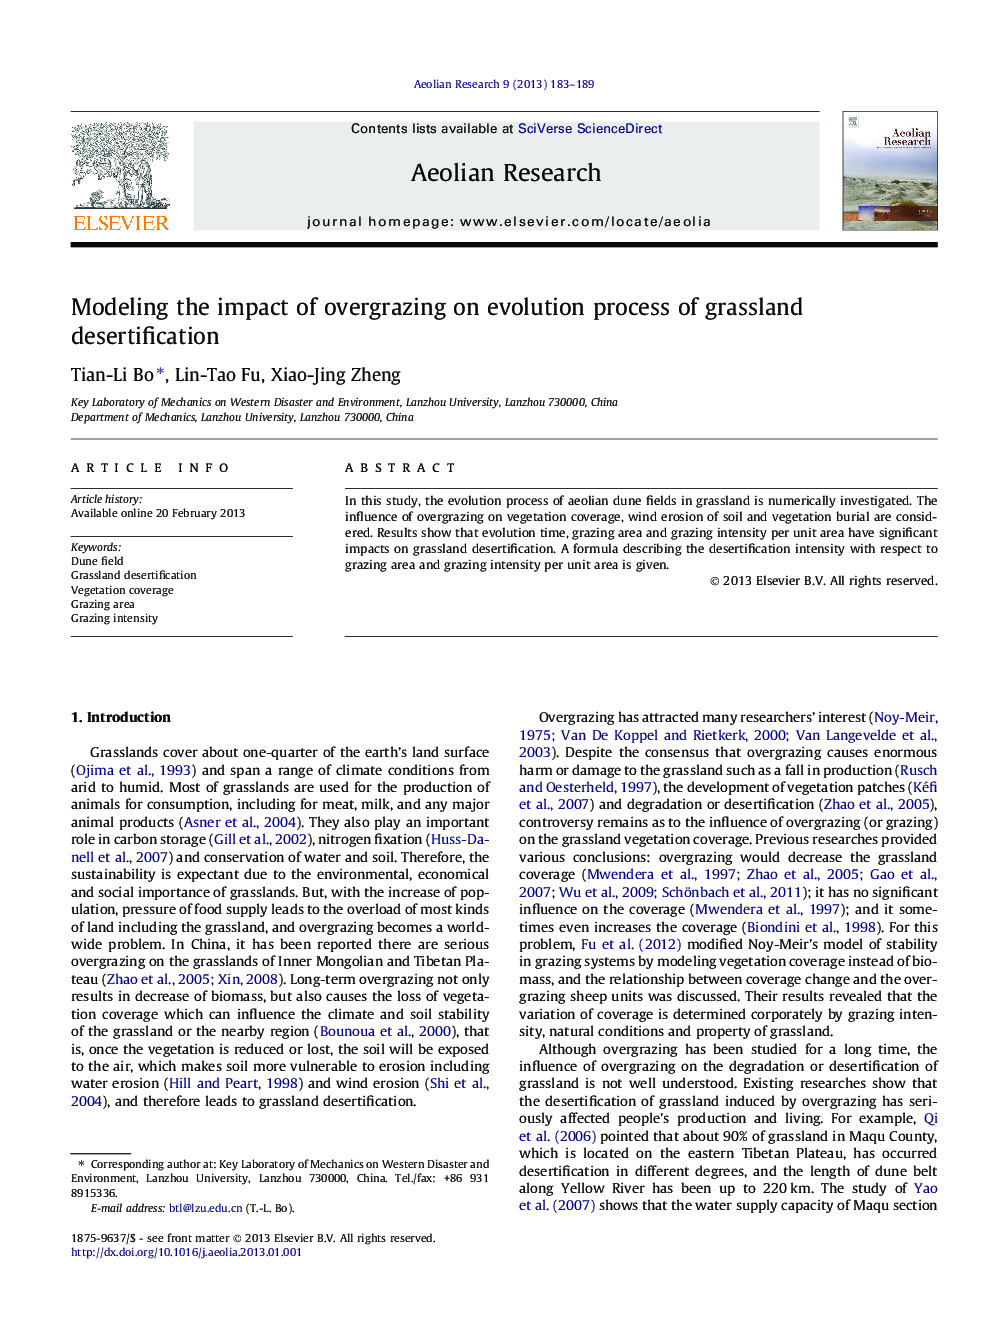 Modeling the impact of overgrazing on evolution process of grassland desertification